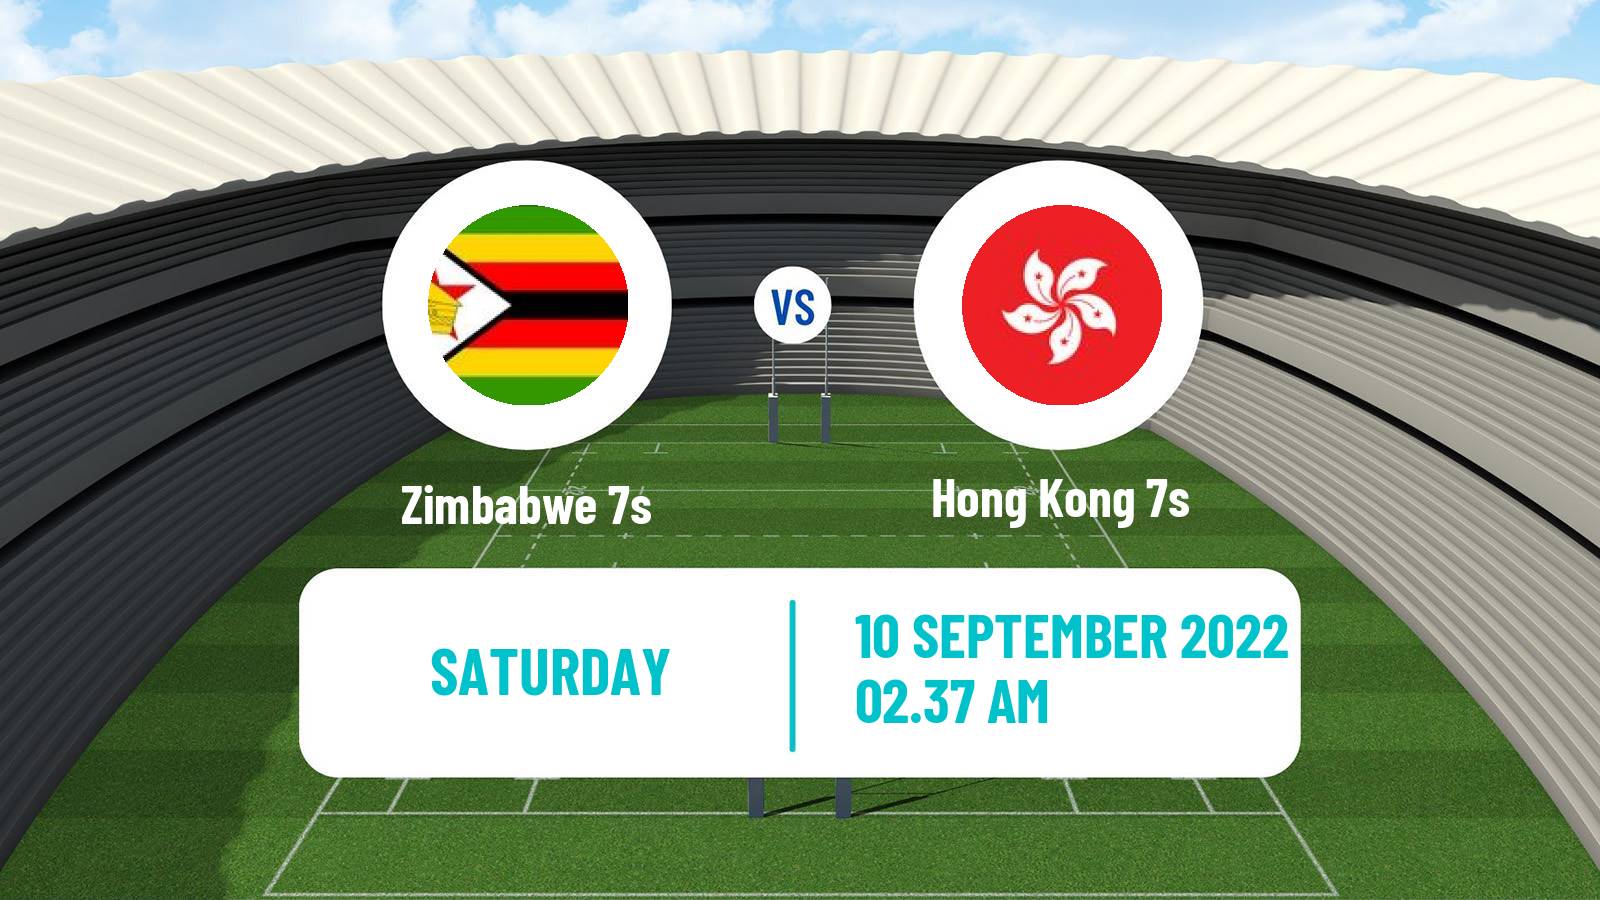 Rugby union Sevens World Cup Zimbabwe 7s - Hong Kong 7s